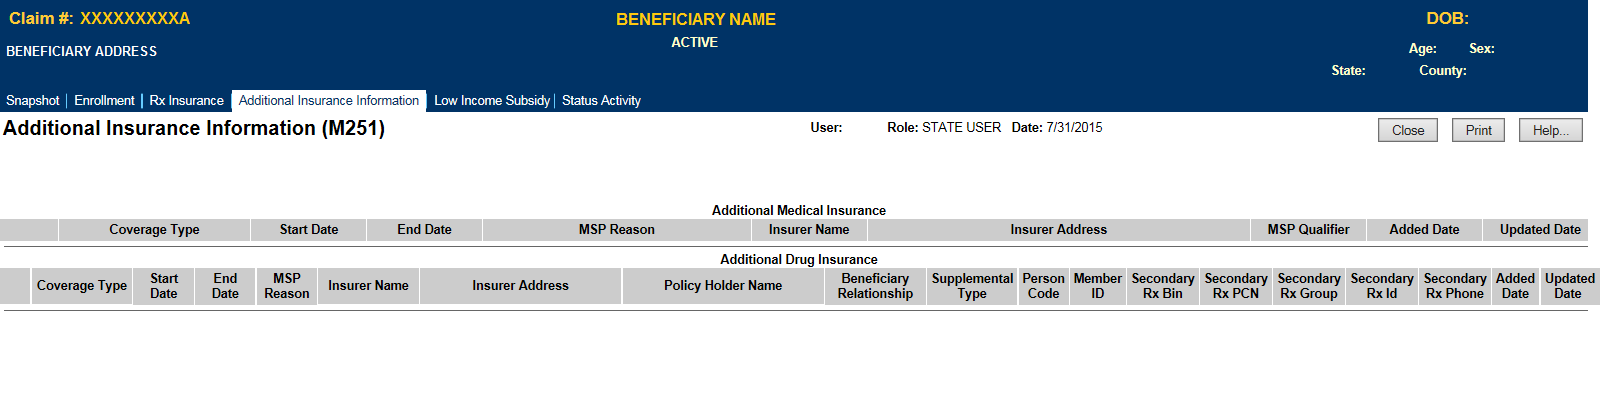 Additional Insurance Information (M251) Screen